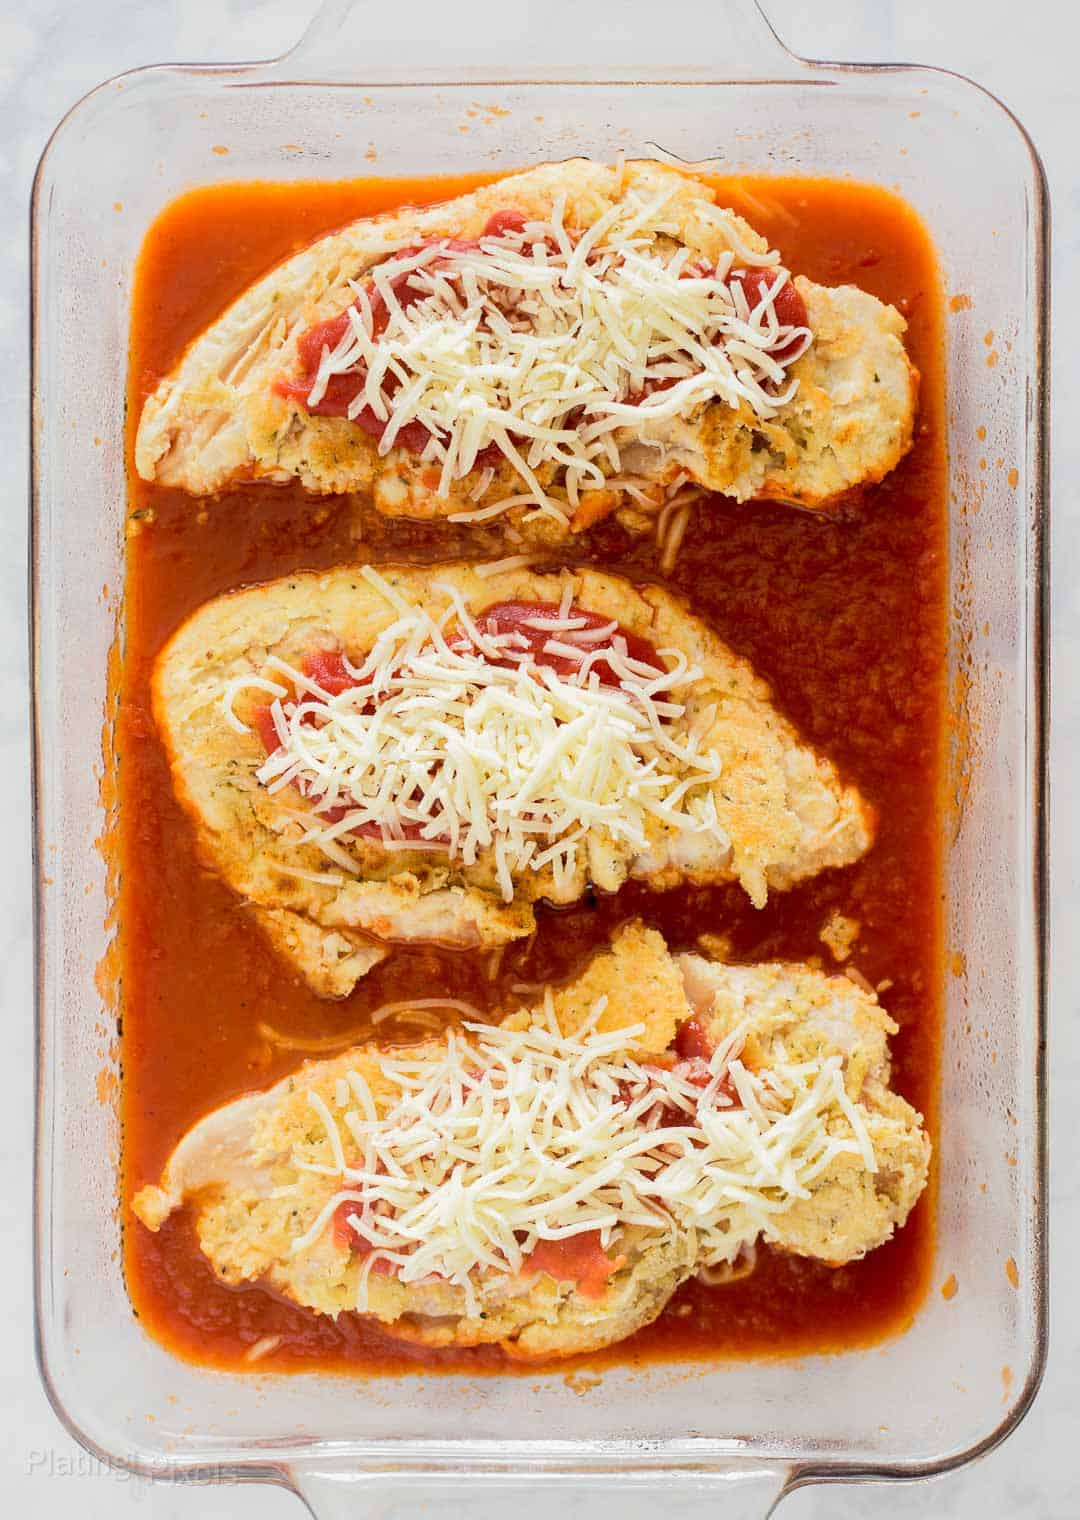 Keto Chicken Parmesan prepared in a baking dish and ready to bake